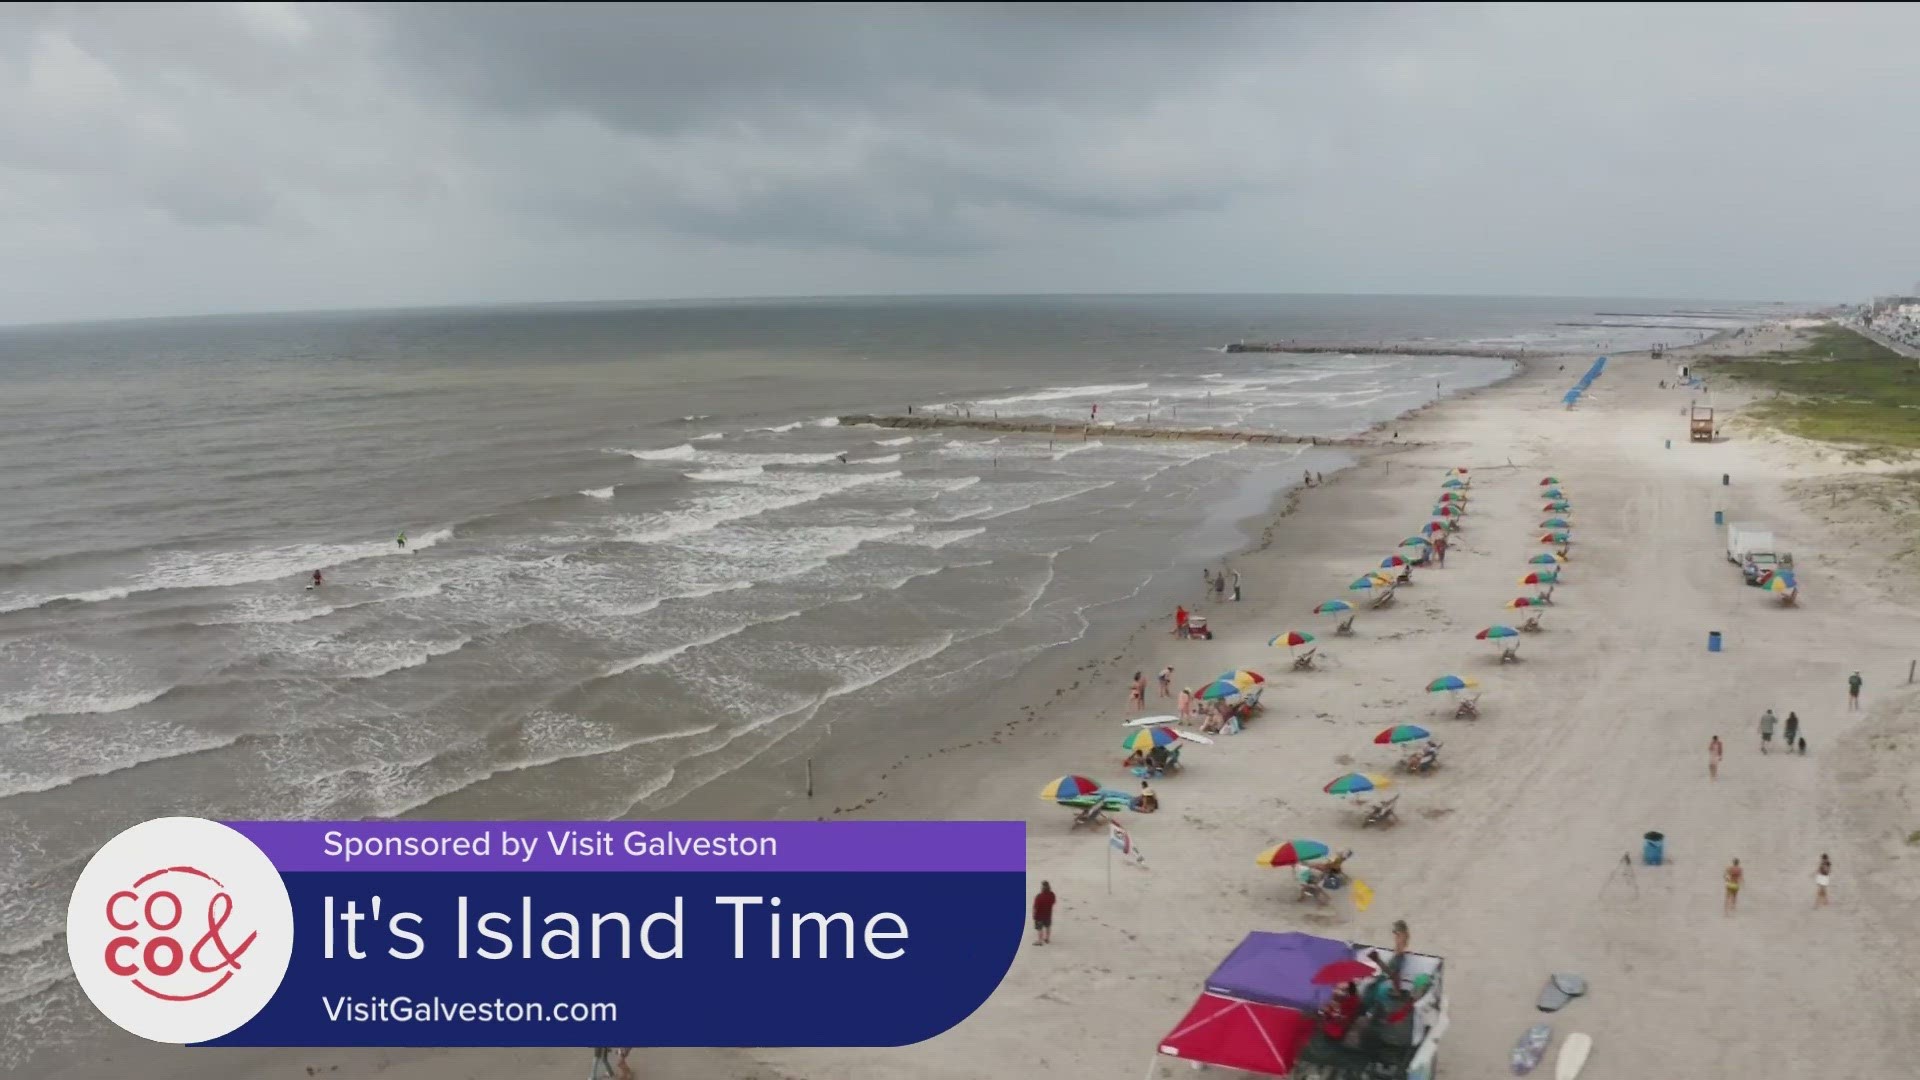 It's Island Time! Visit Galveston for a fun and easy vacation the whole family will enjoy! Check out VisitGalveston.com for more info. **PAID CONTENT**